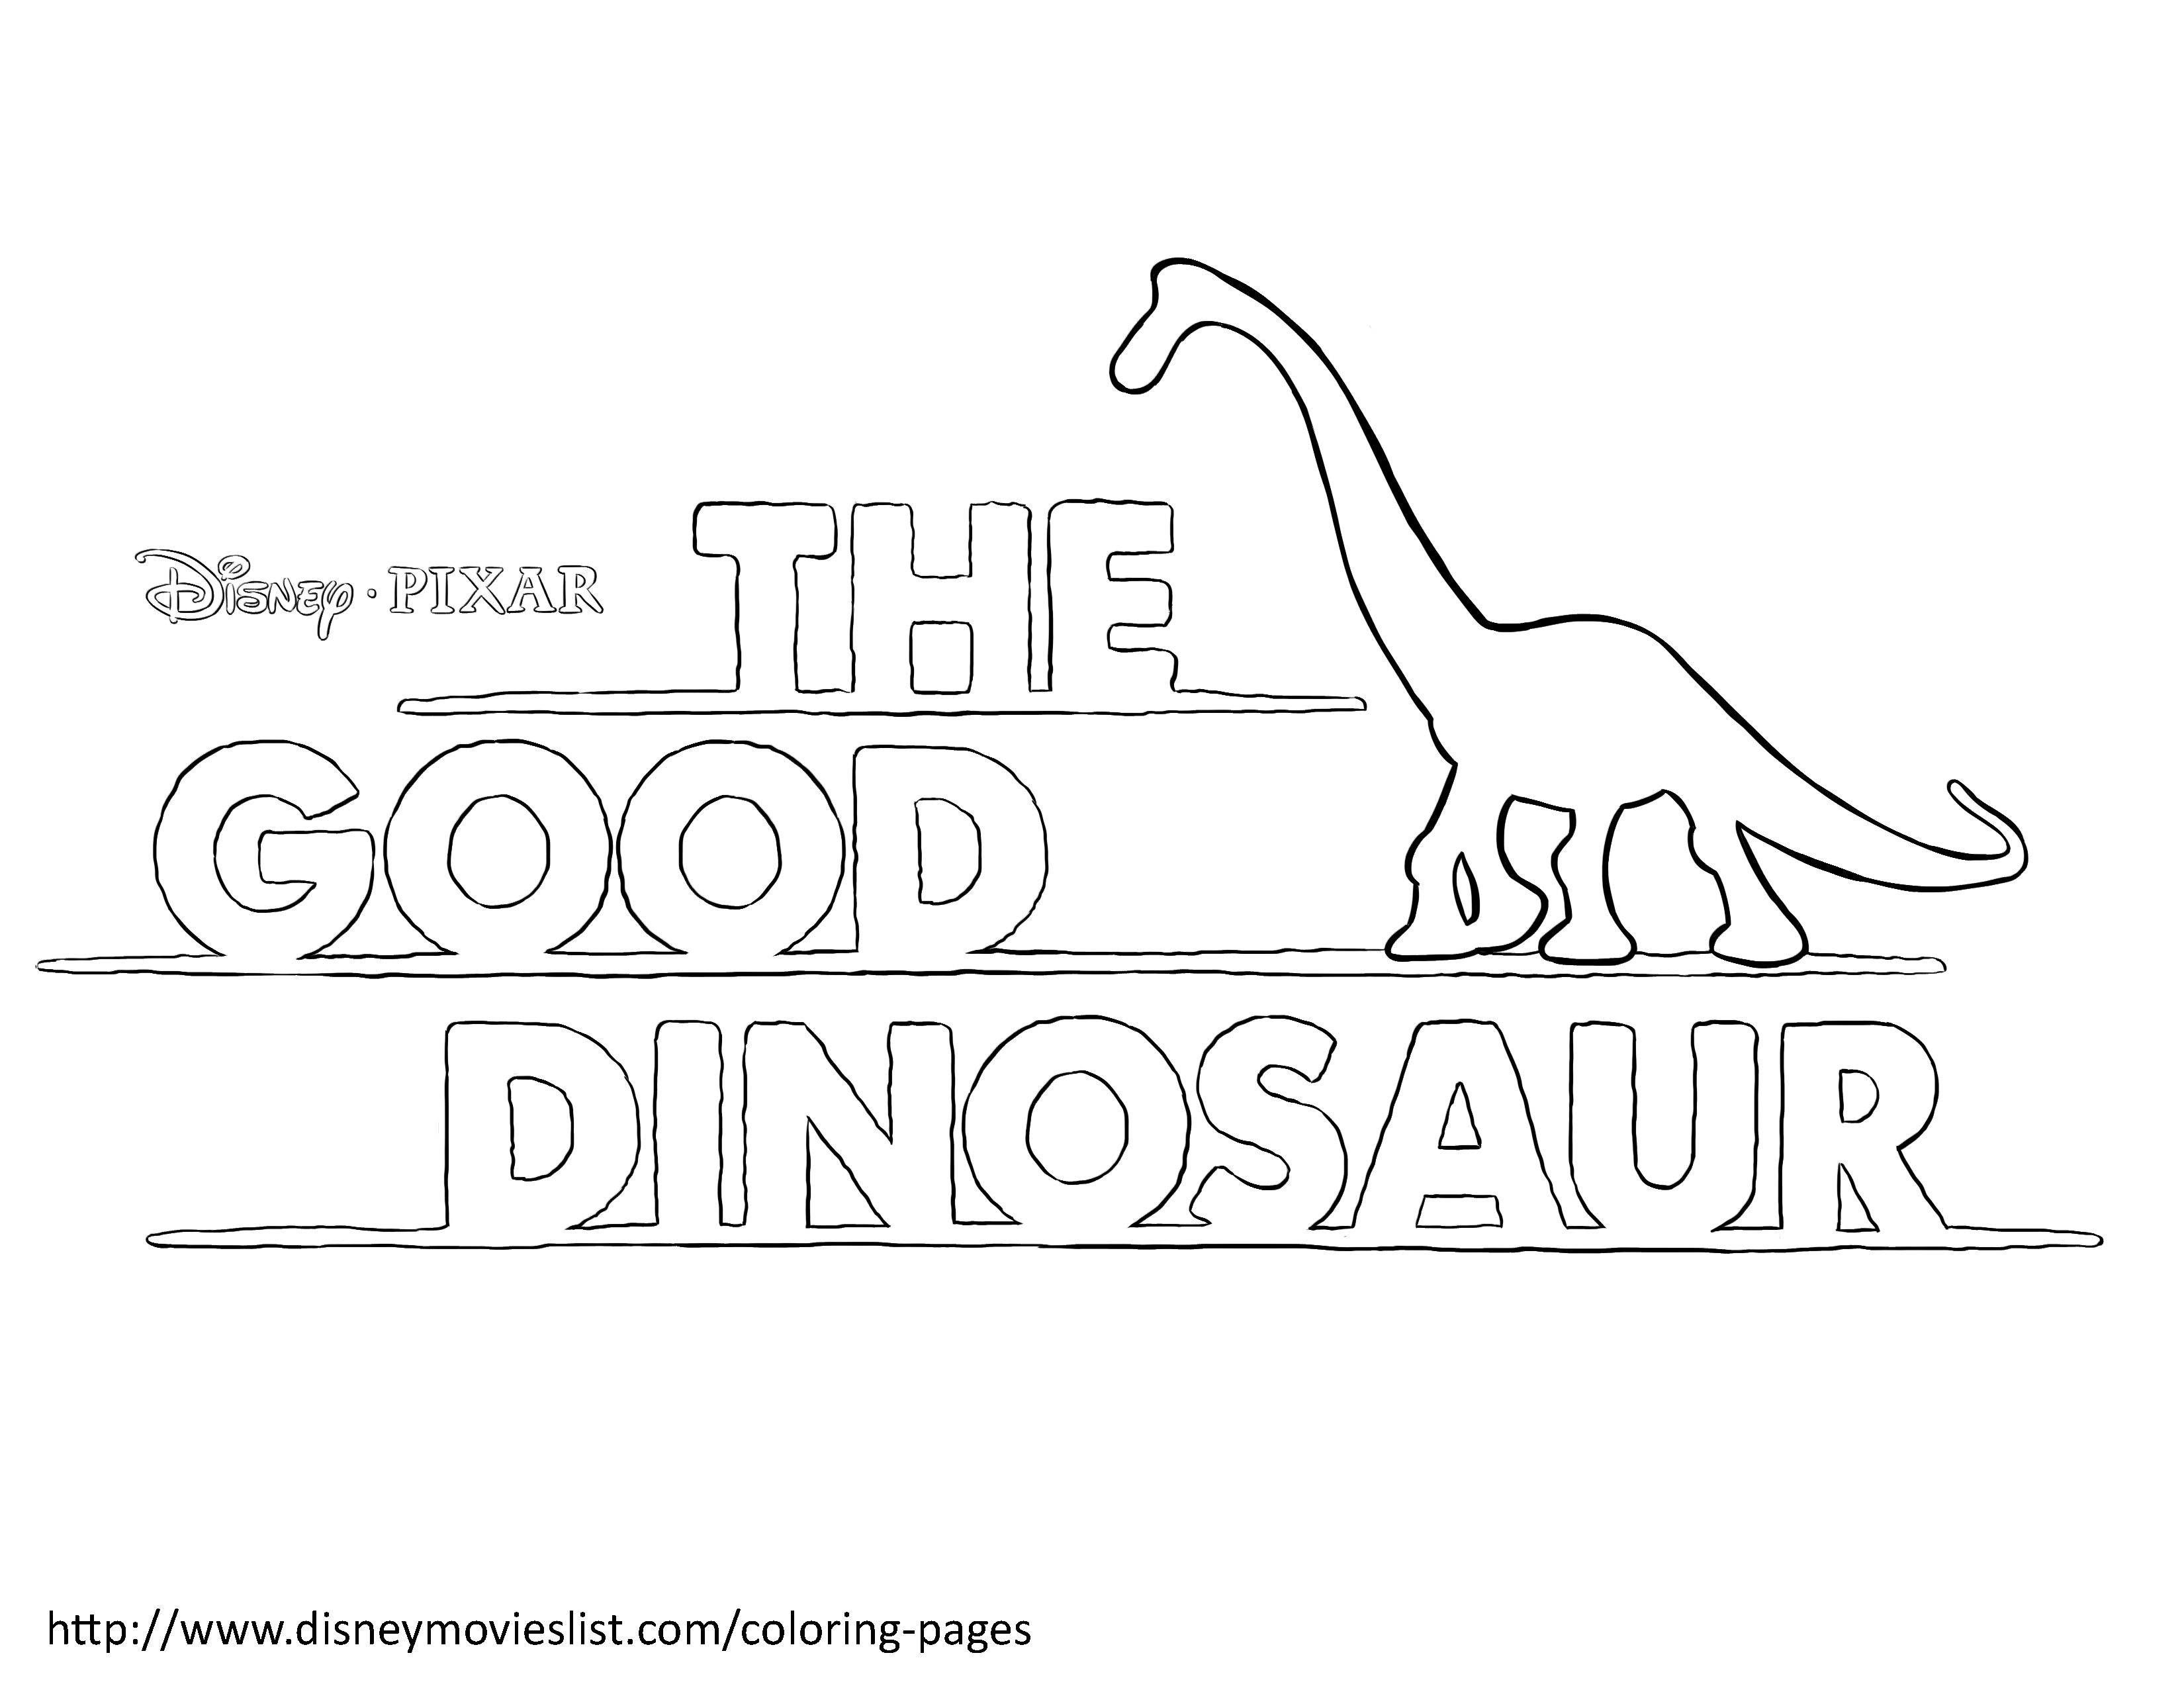 Disney's The Good Dinosaur Coloring Pages Sheet, Free Disney ...